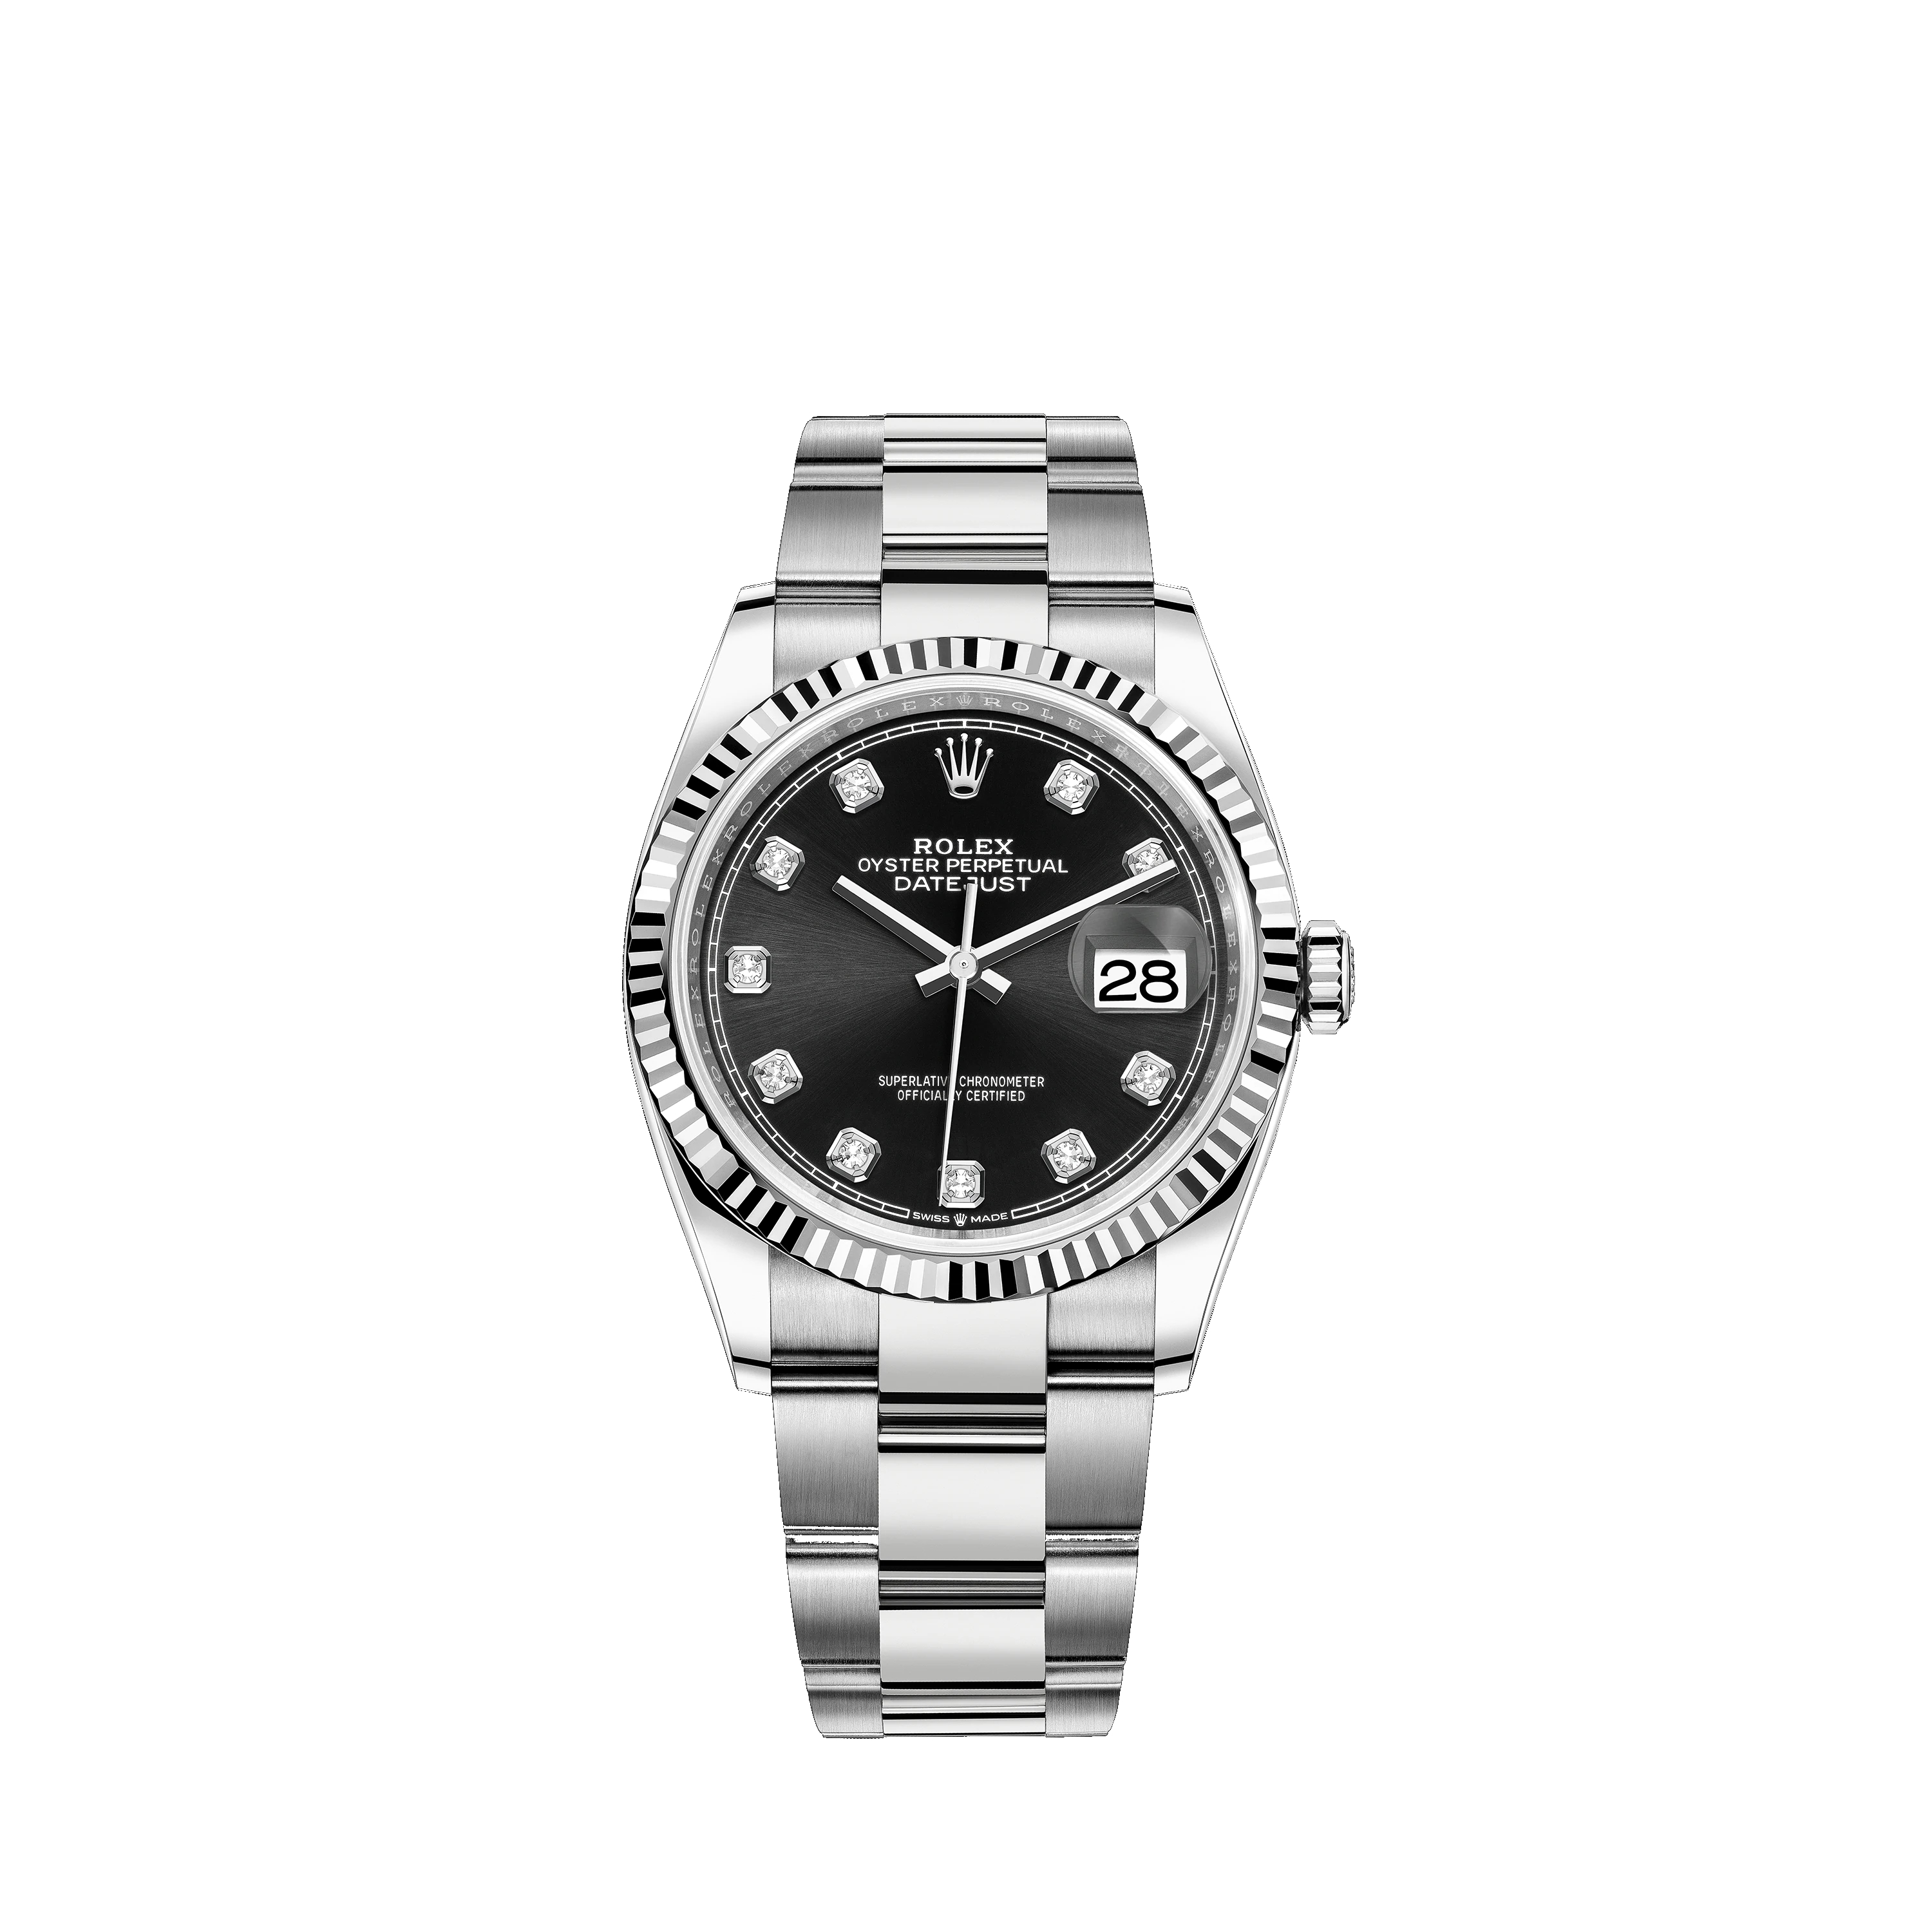 Datejust 36 126234 White Gold & Stainless Steel Watch (Black Set with Diamonds)